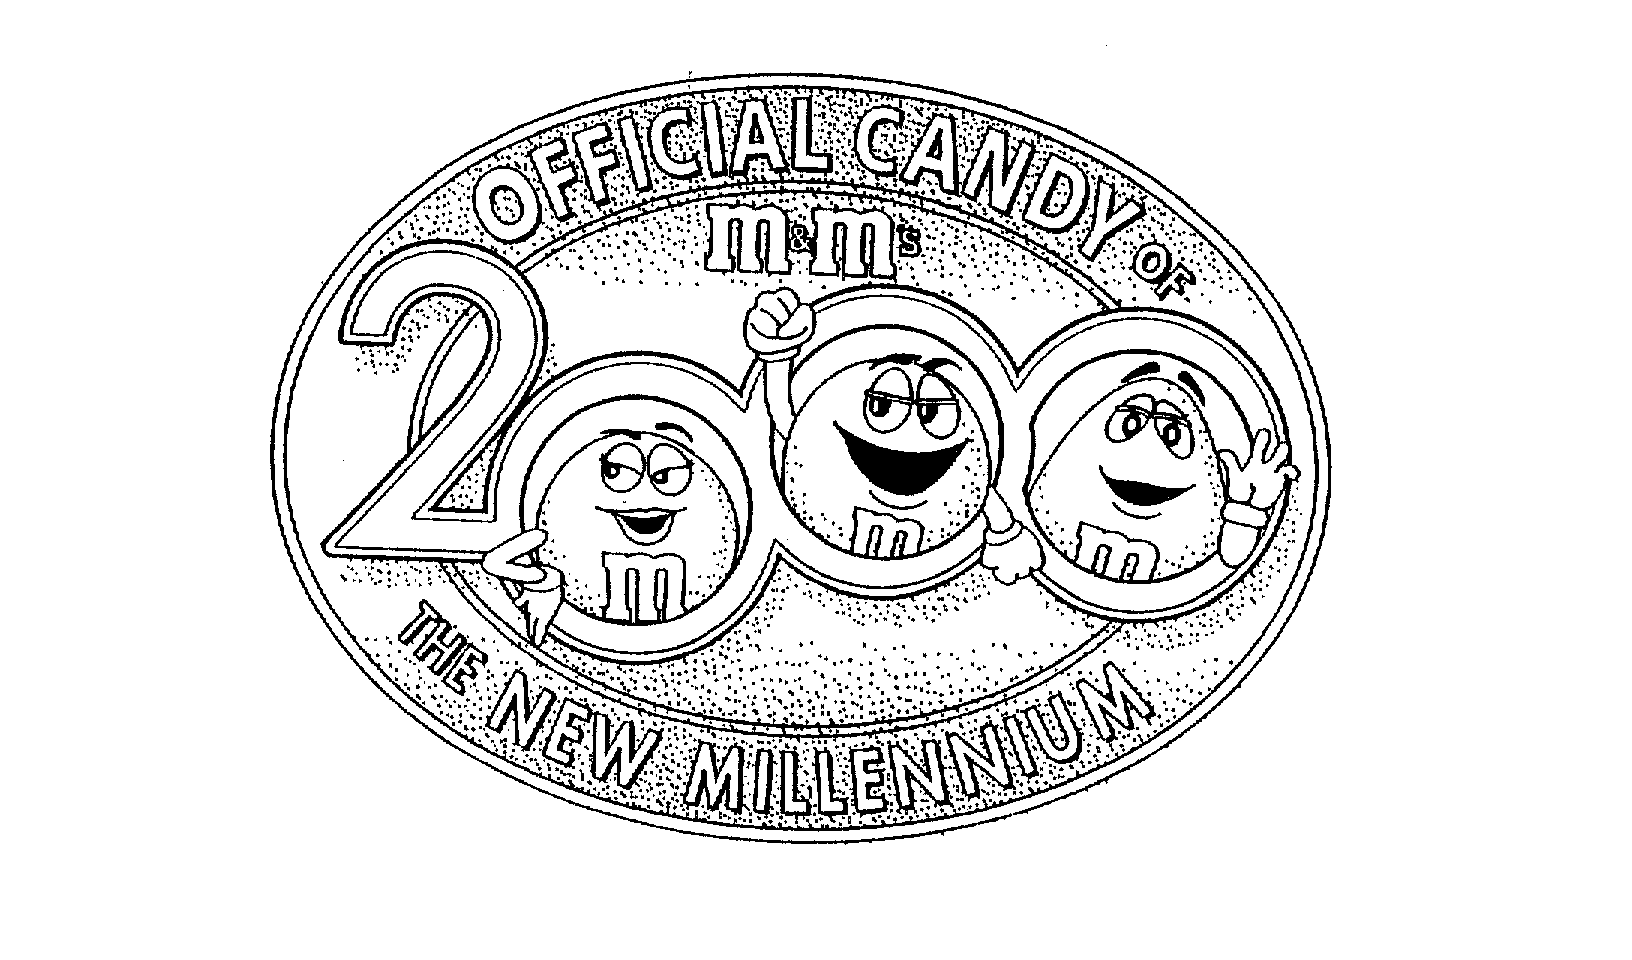  M&amp;M'S OFFICIAL CANDY OF THE NEW MILLENNIUM 2000